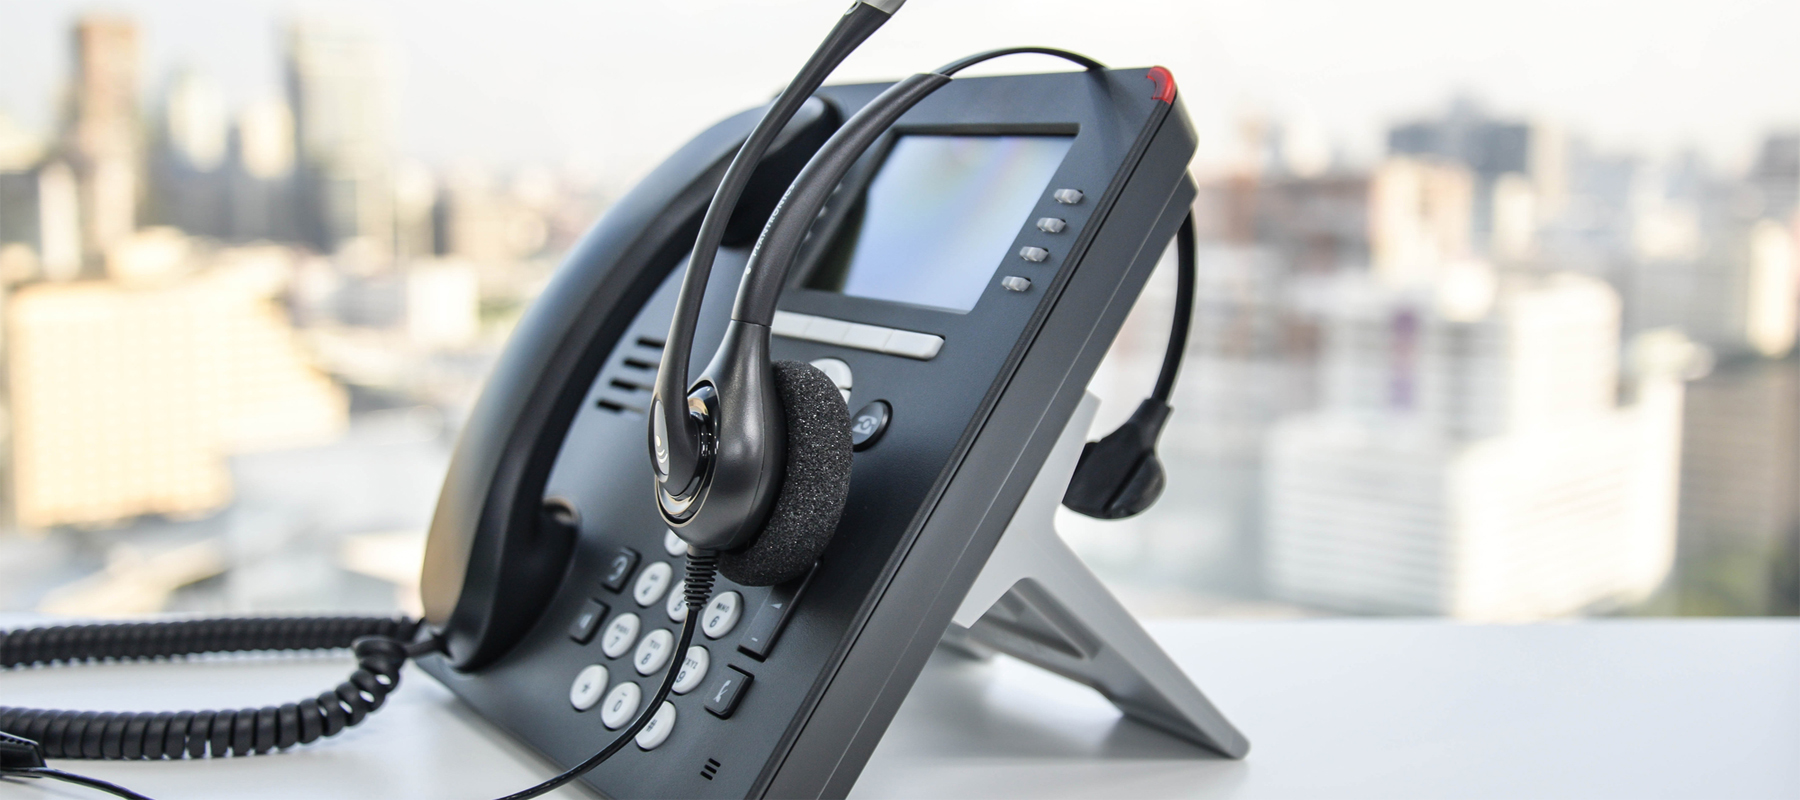 VoIP Phone with Headset